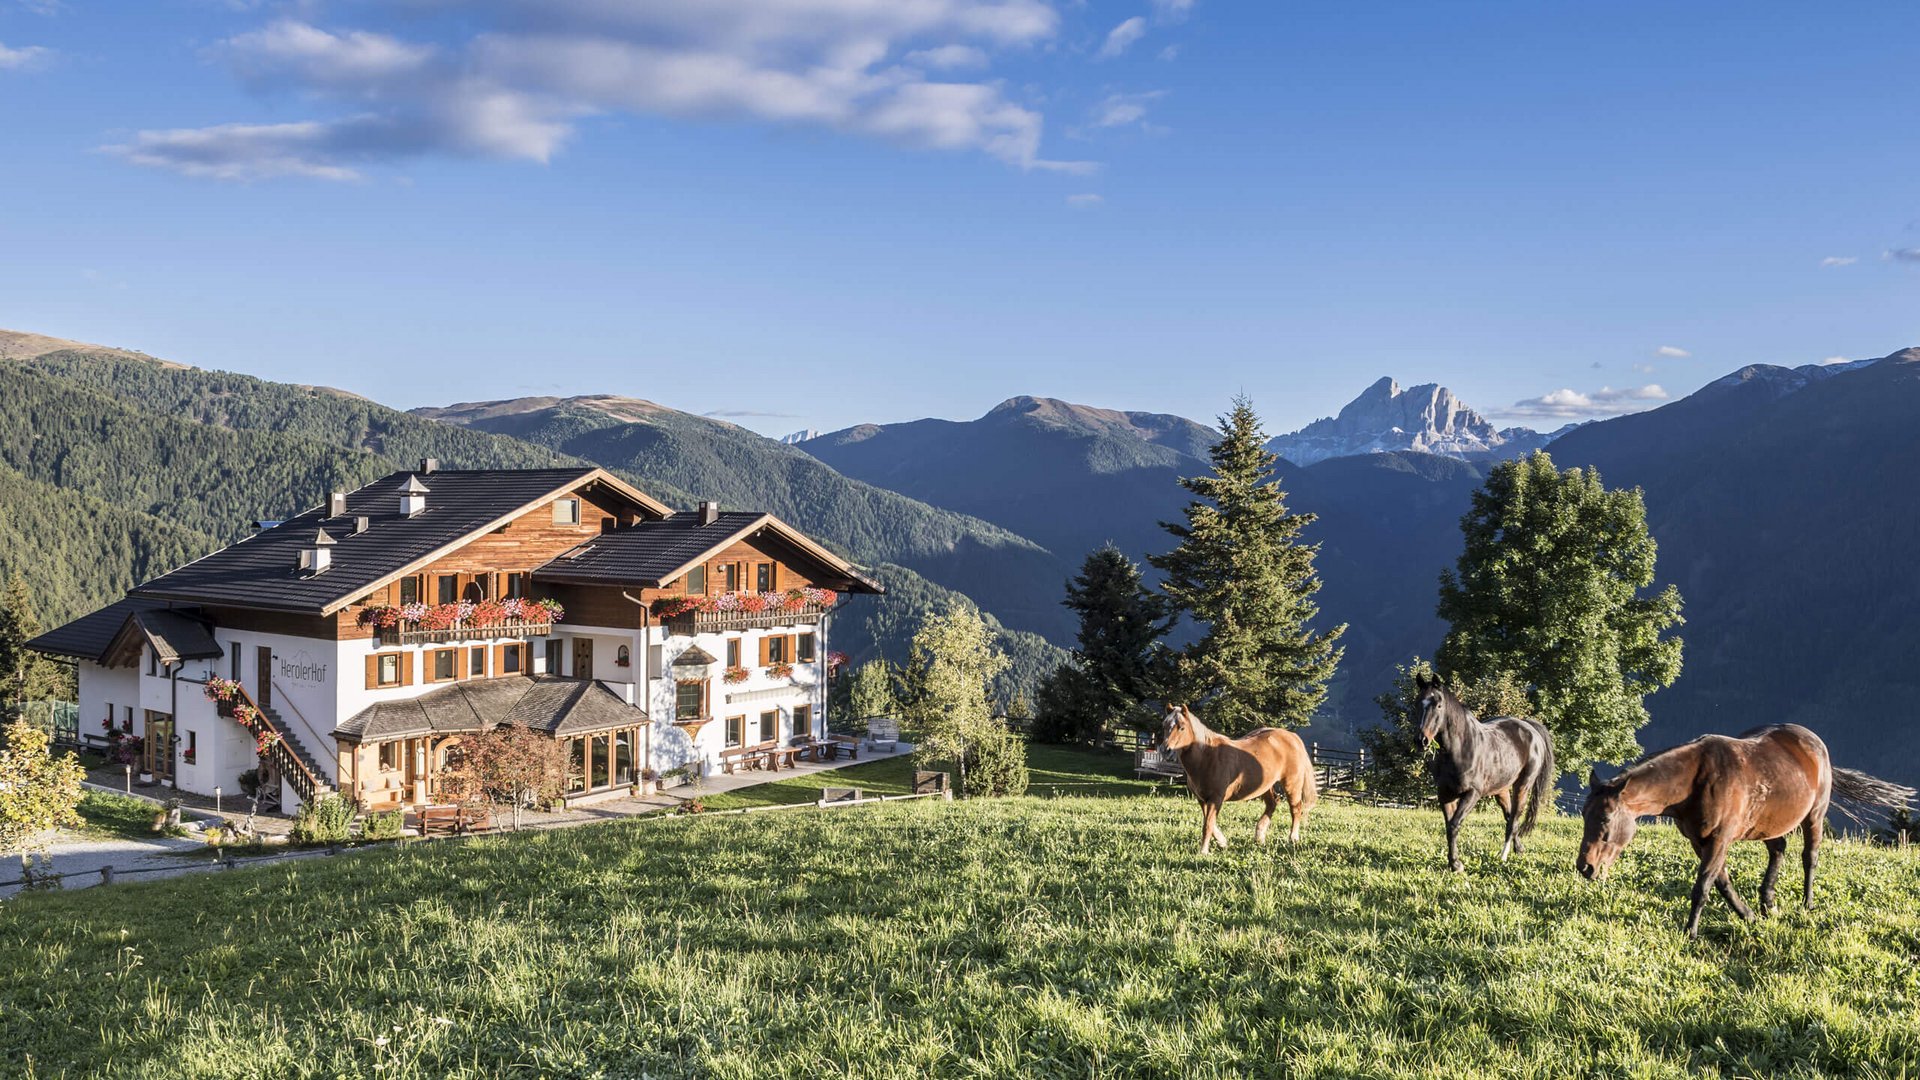 Hotel in the Dolomites: My mountain retreat